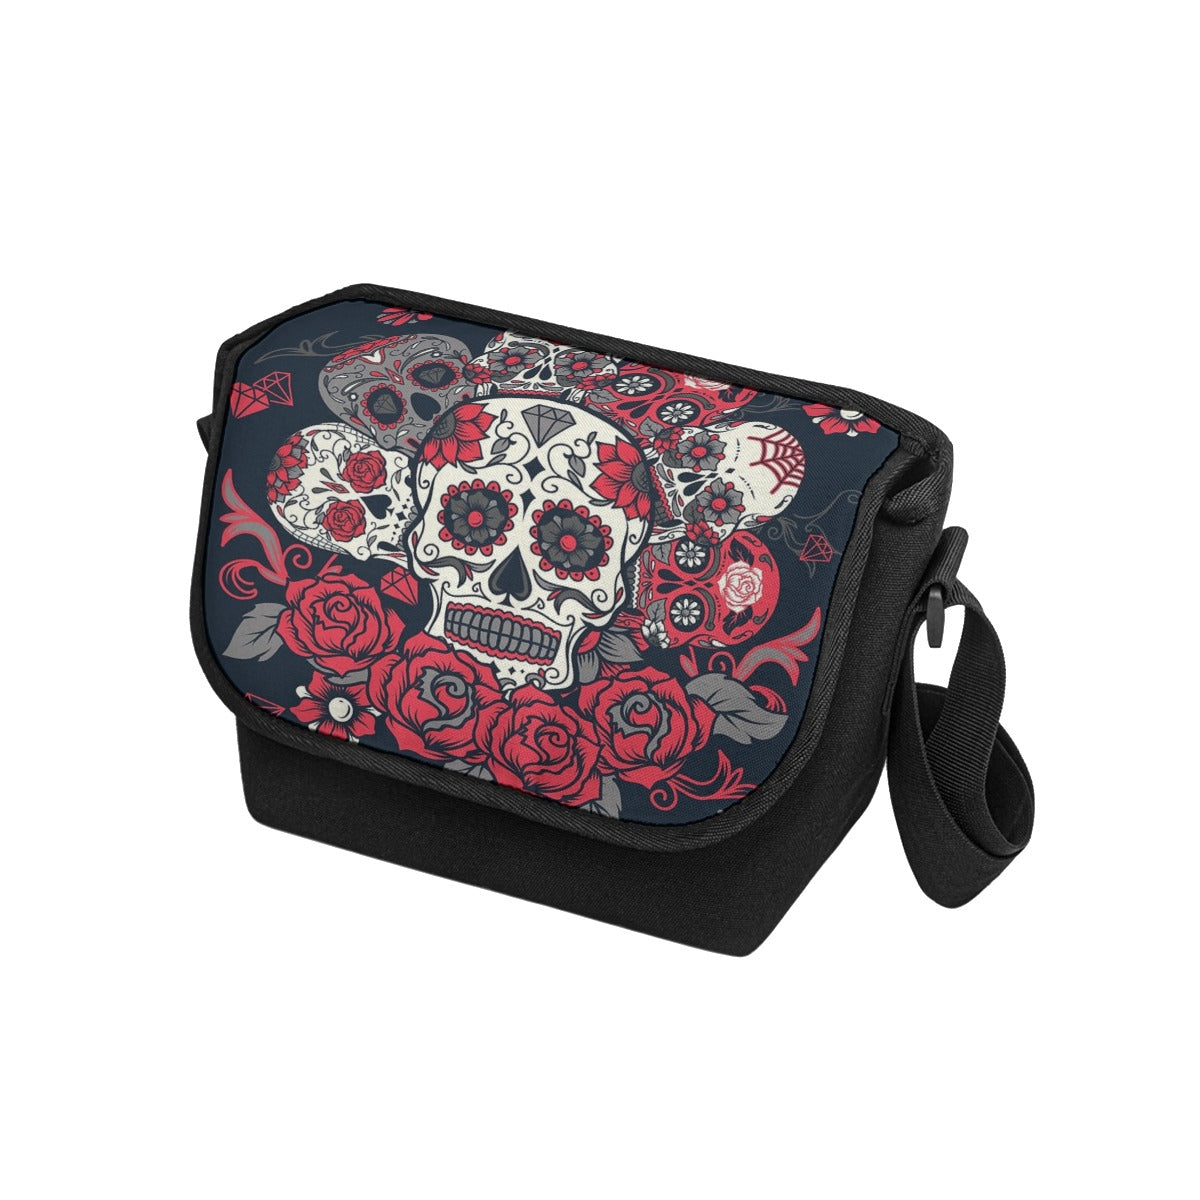 Day of the dead Gothic Mexican skull Messenger Bags, Halloween sugar skull floral messenger bag